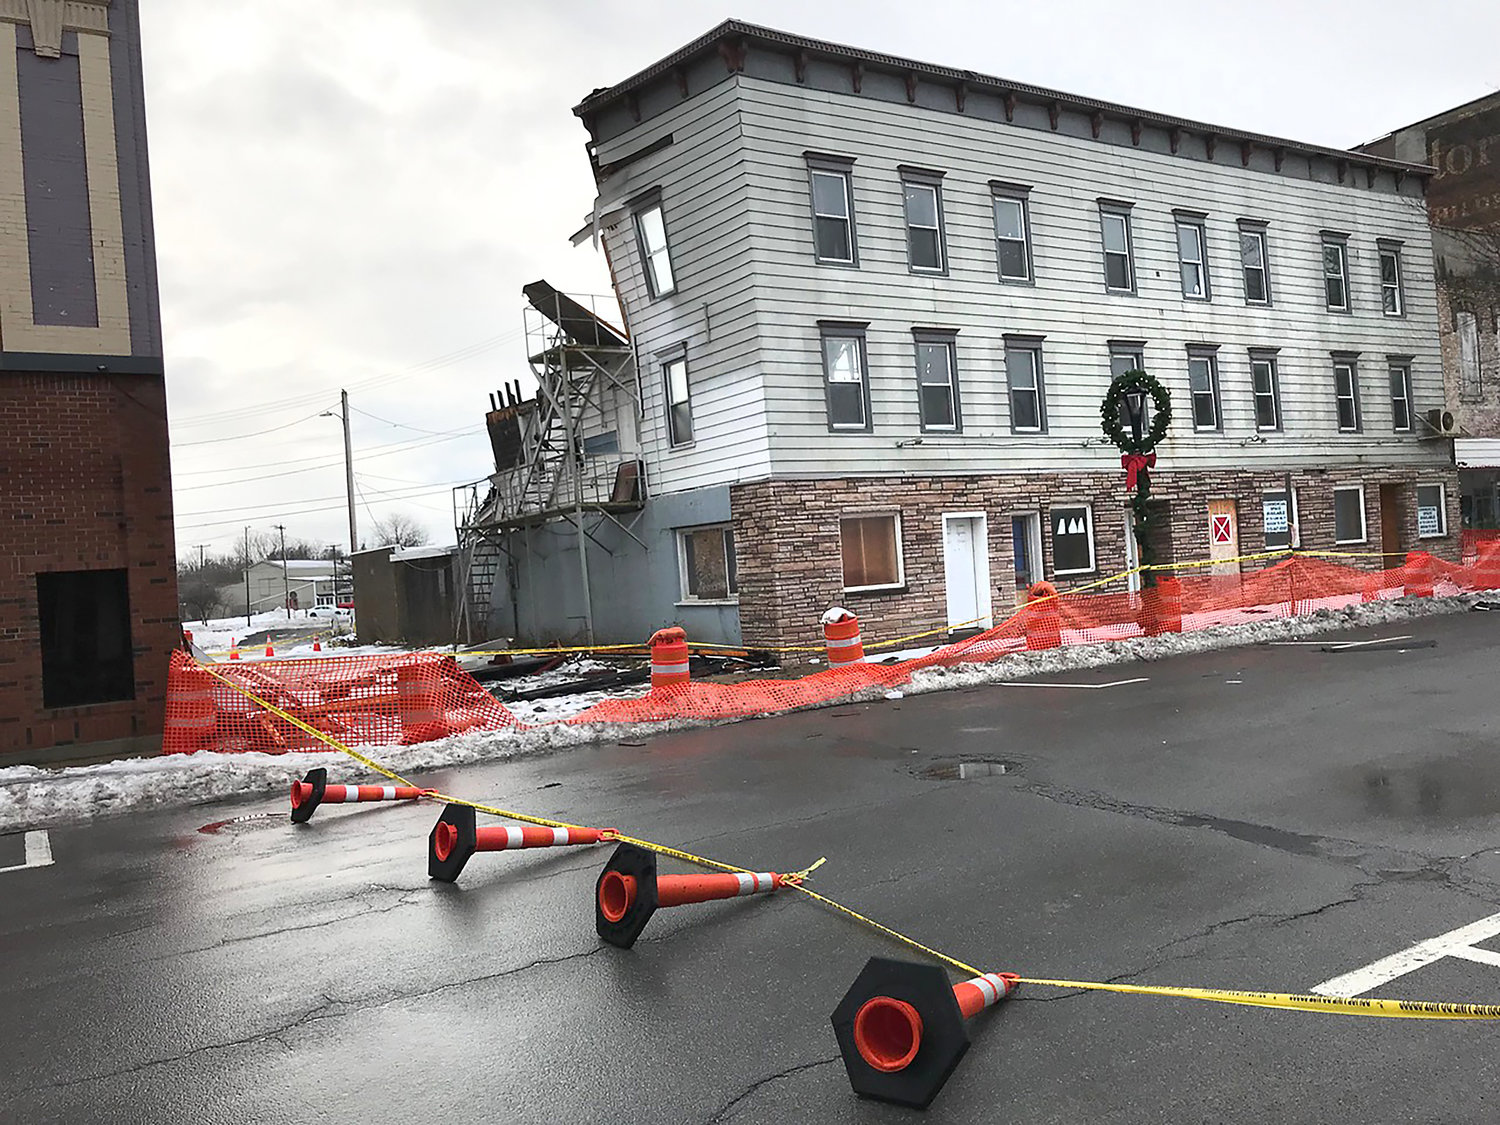 Madison Street in Oneida was closed temporarily from Main Street to Williams Street after a building collapse Dec. 22 at the site of the former Madison House Restaurant.